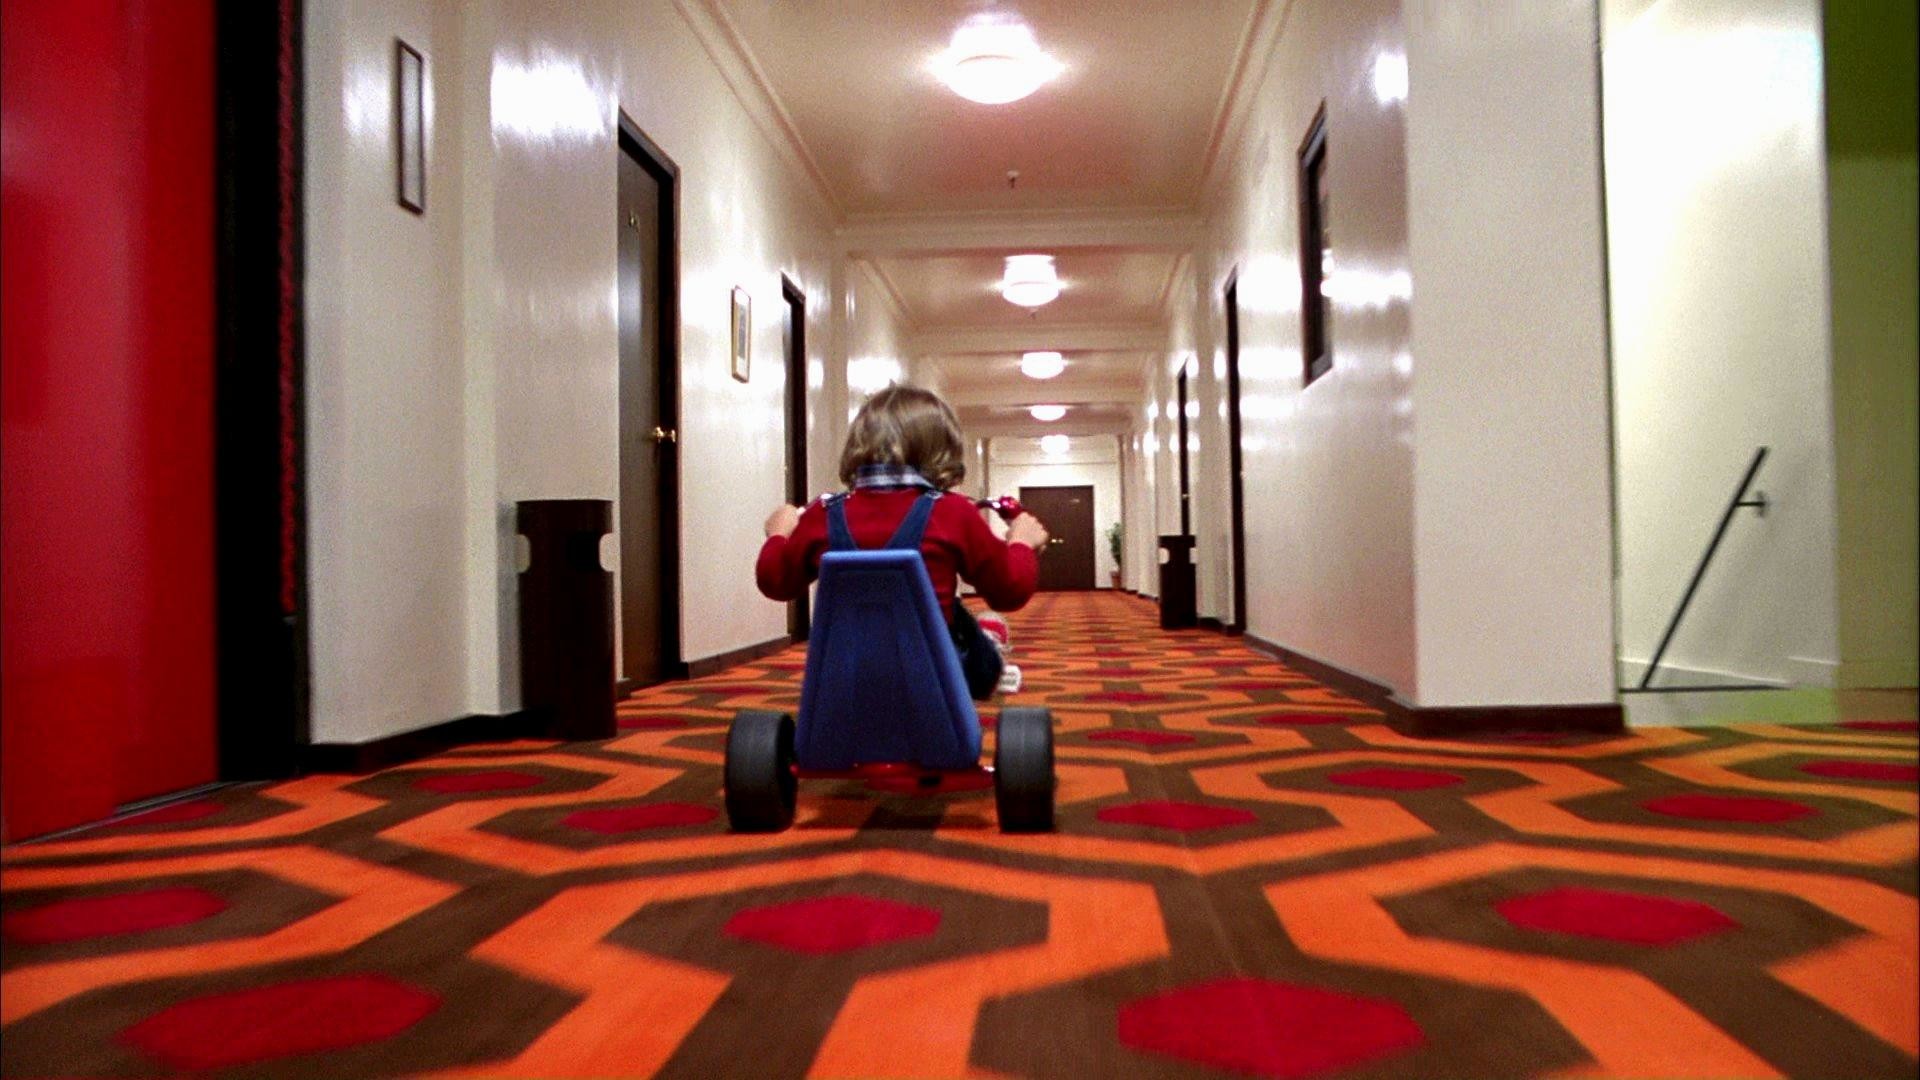 1920x1080 ... The Shining Wallpapers, High Quality Wallpapers of The Shining in .